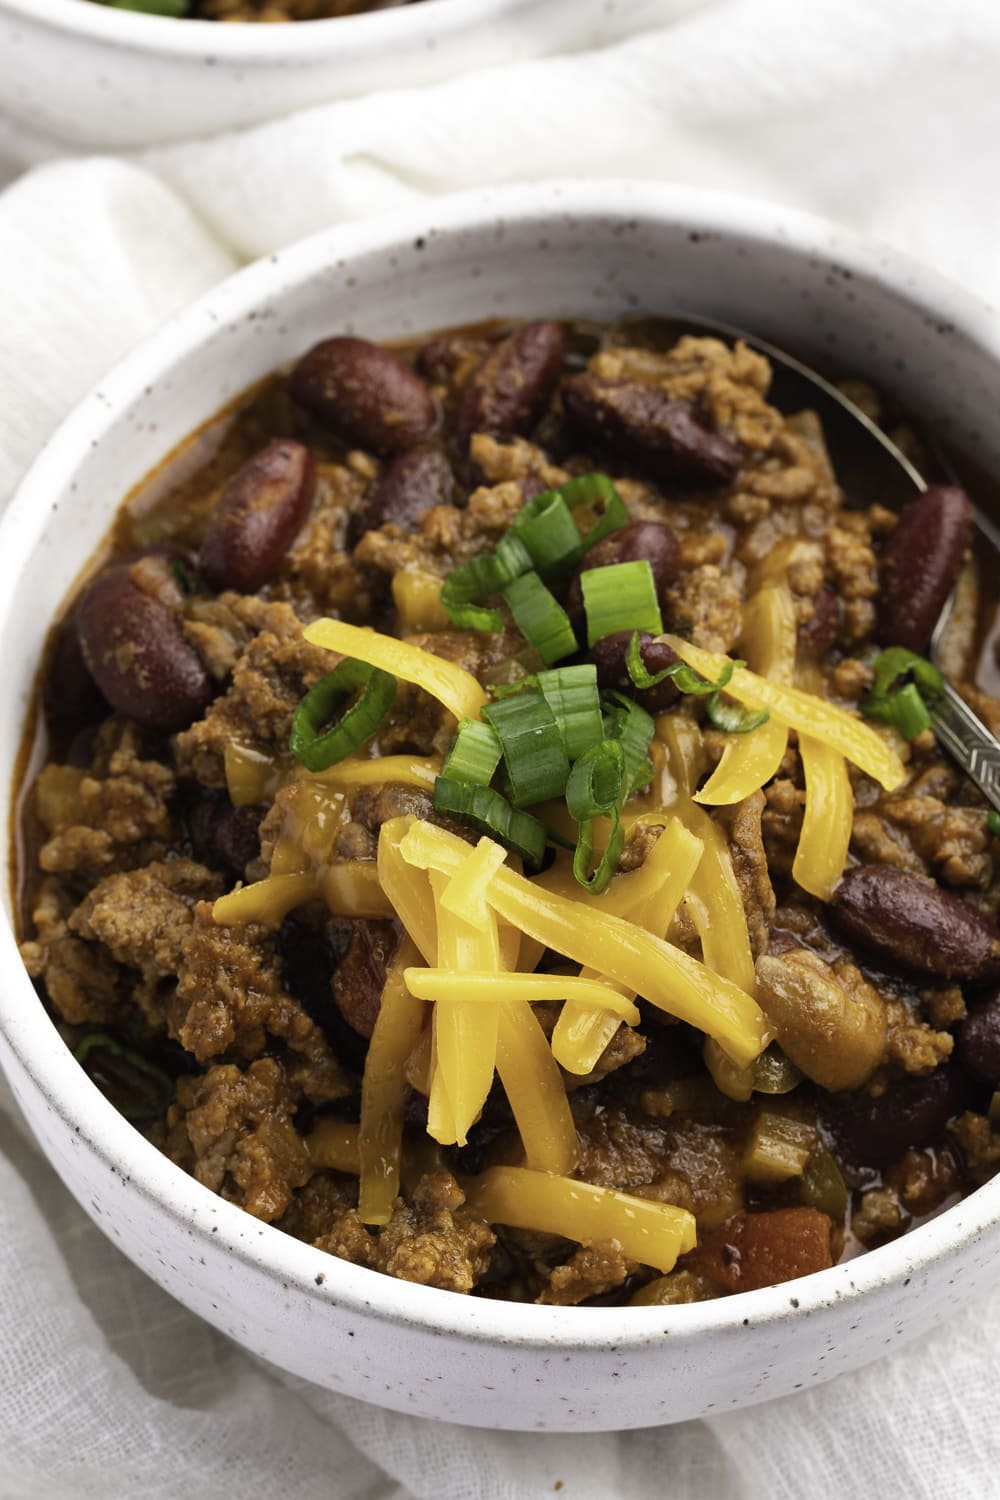 Tim Horton's Chili Recipe with Kidney Beans, Green Onions and Cheese